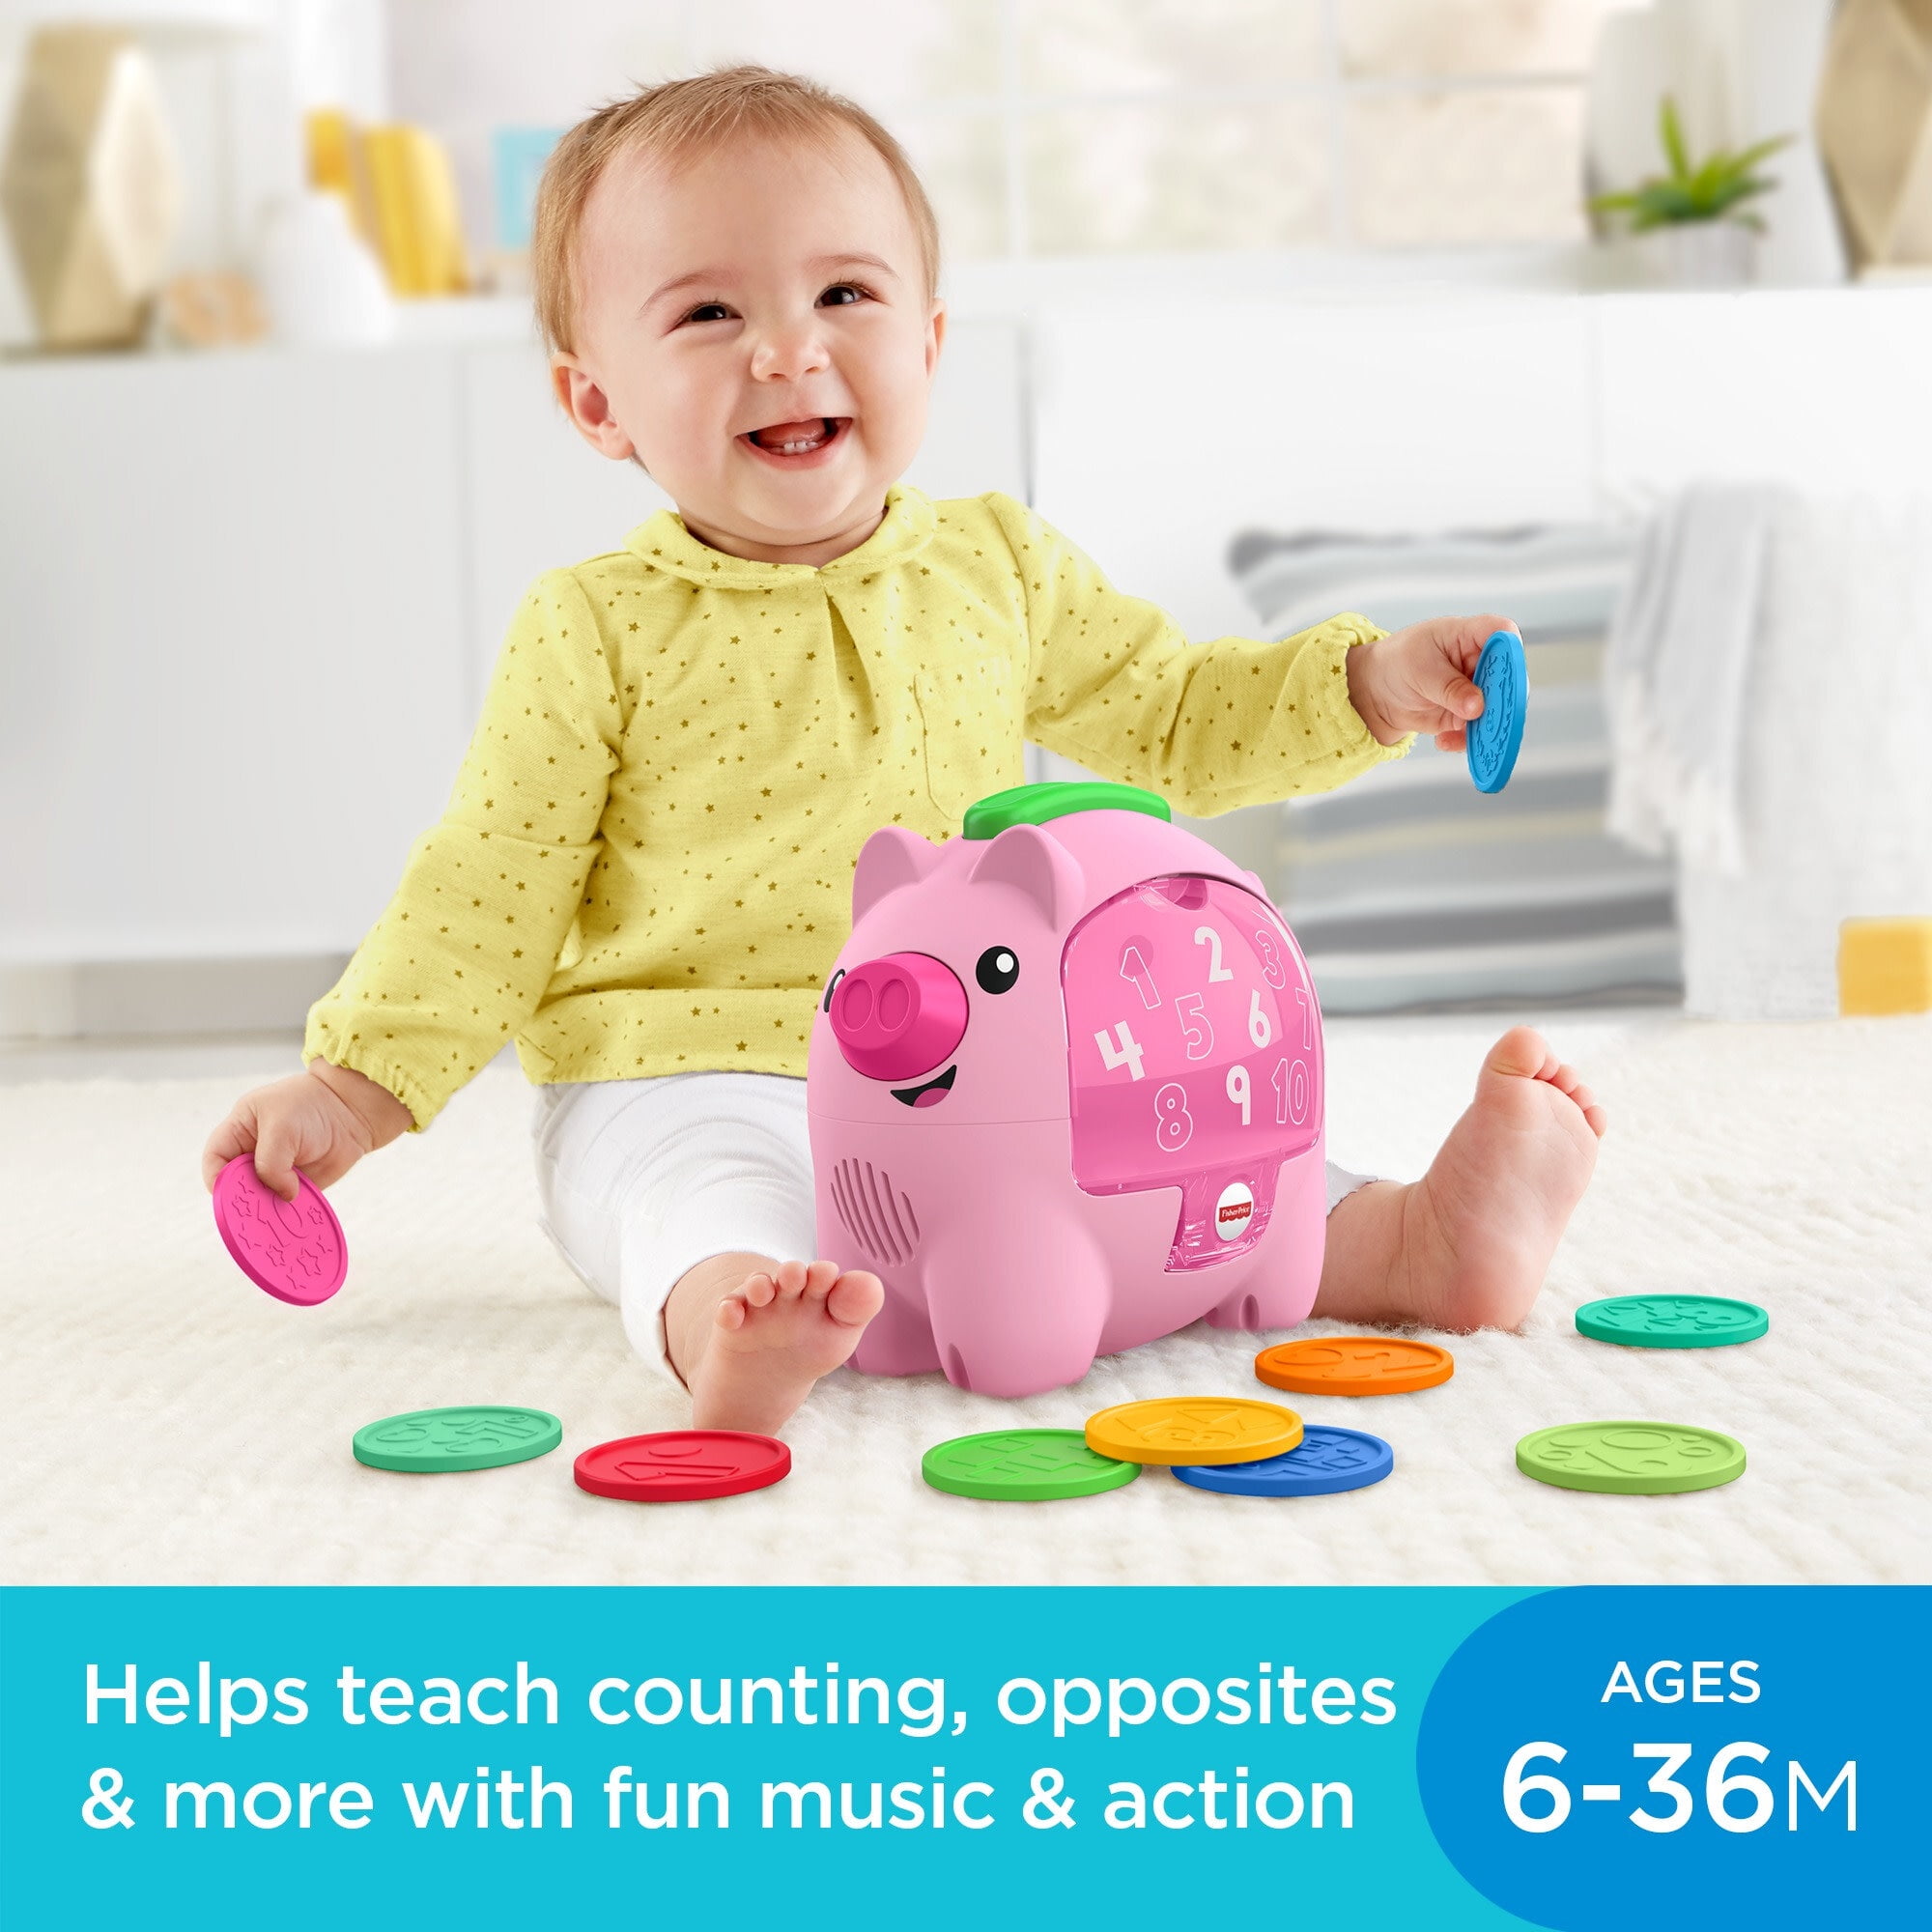 FISHER PRICE LAUGH AND LEARN PIGGY BANK SMART STAGES (U3) & (U2)